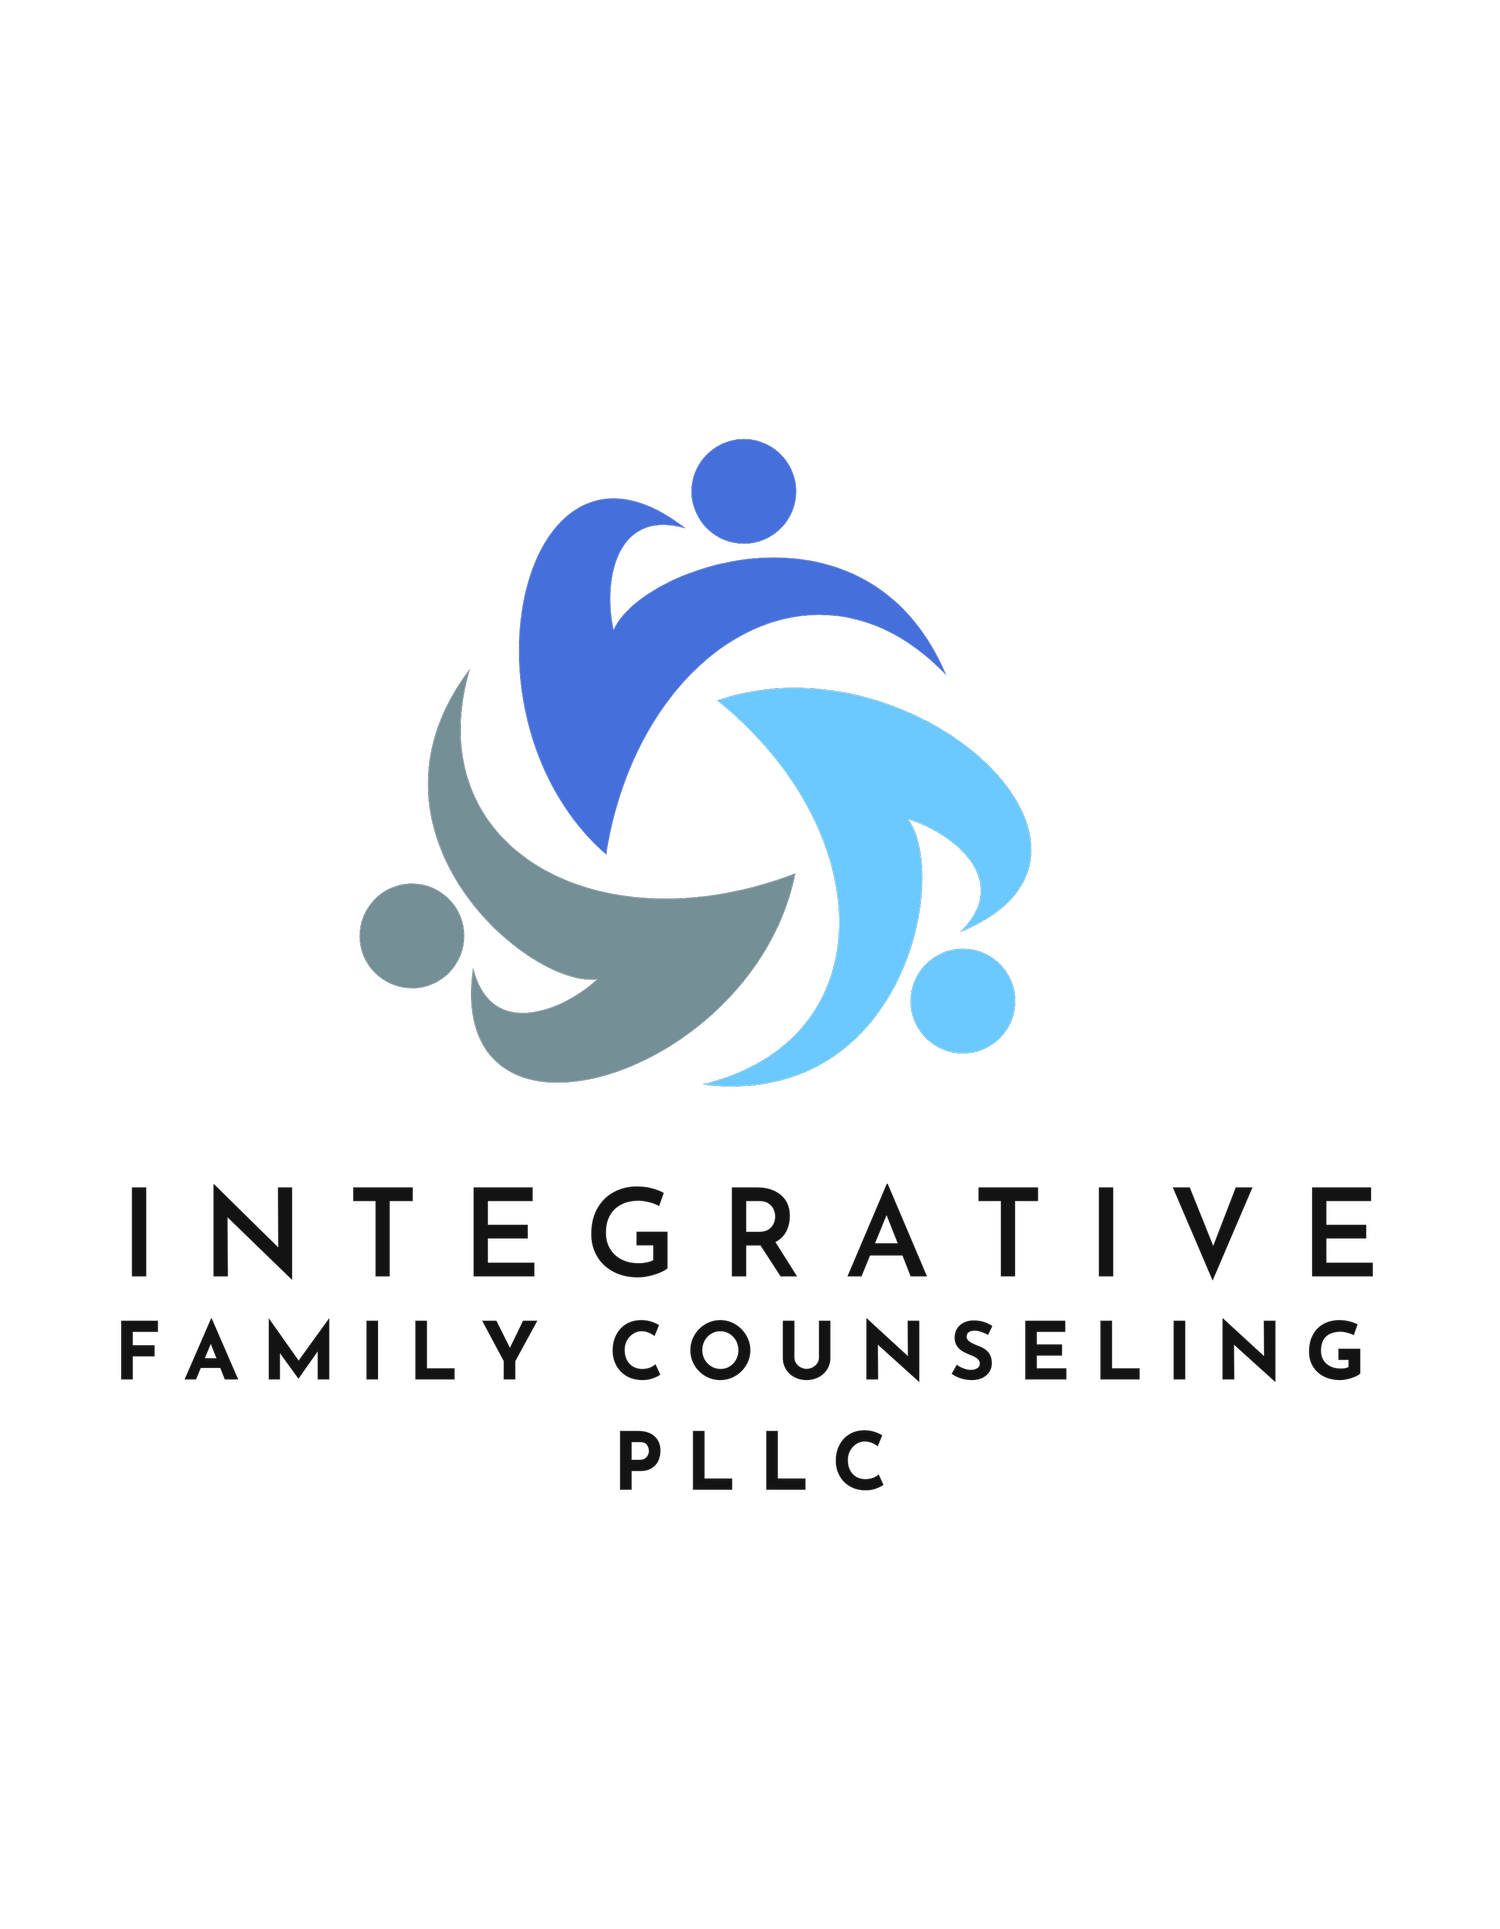 Integrative Family Counseling, PLLC